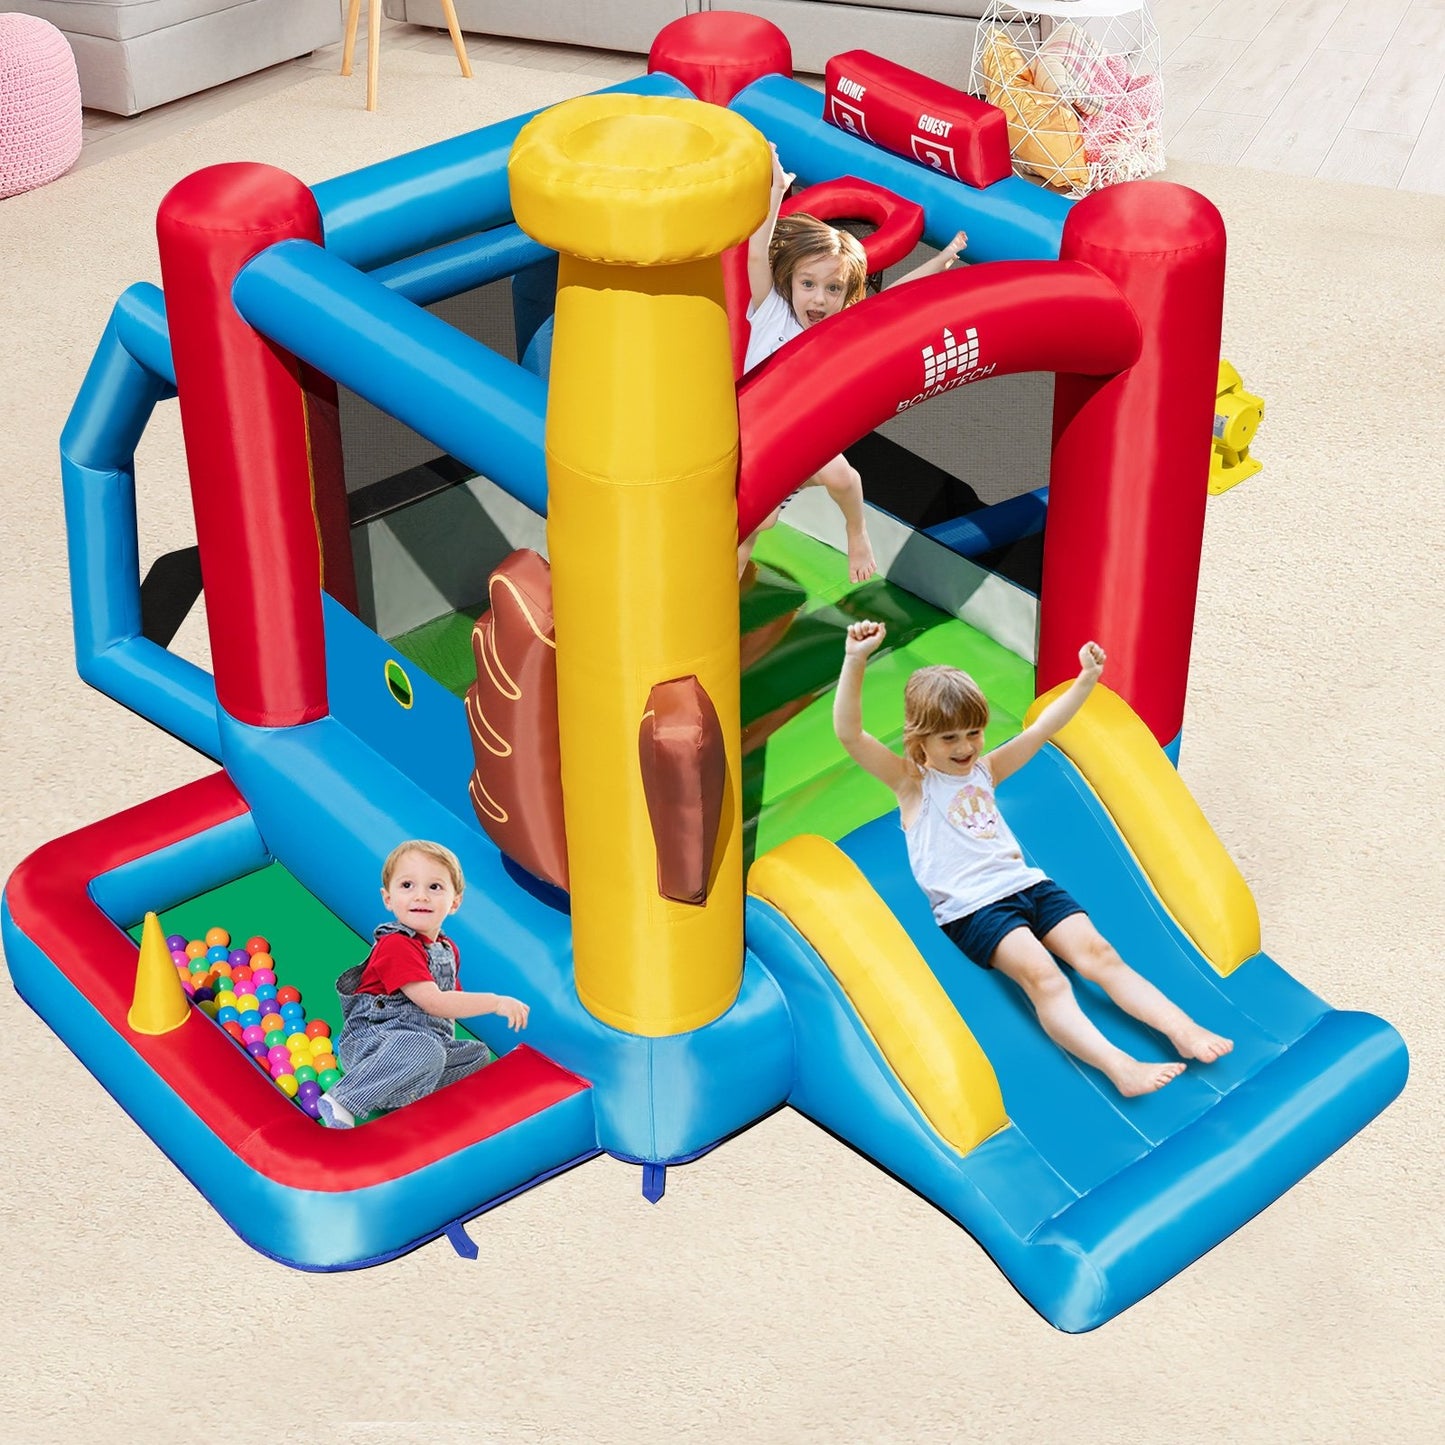 Baseball Themed Inflatable Bounce House with Ball Pit and Ocean Balls with 735W Blower, Multicolor